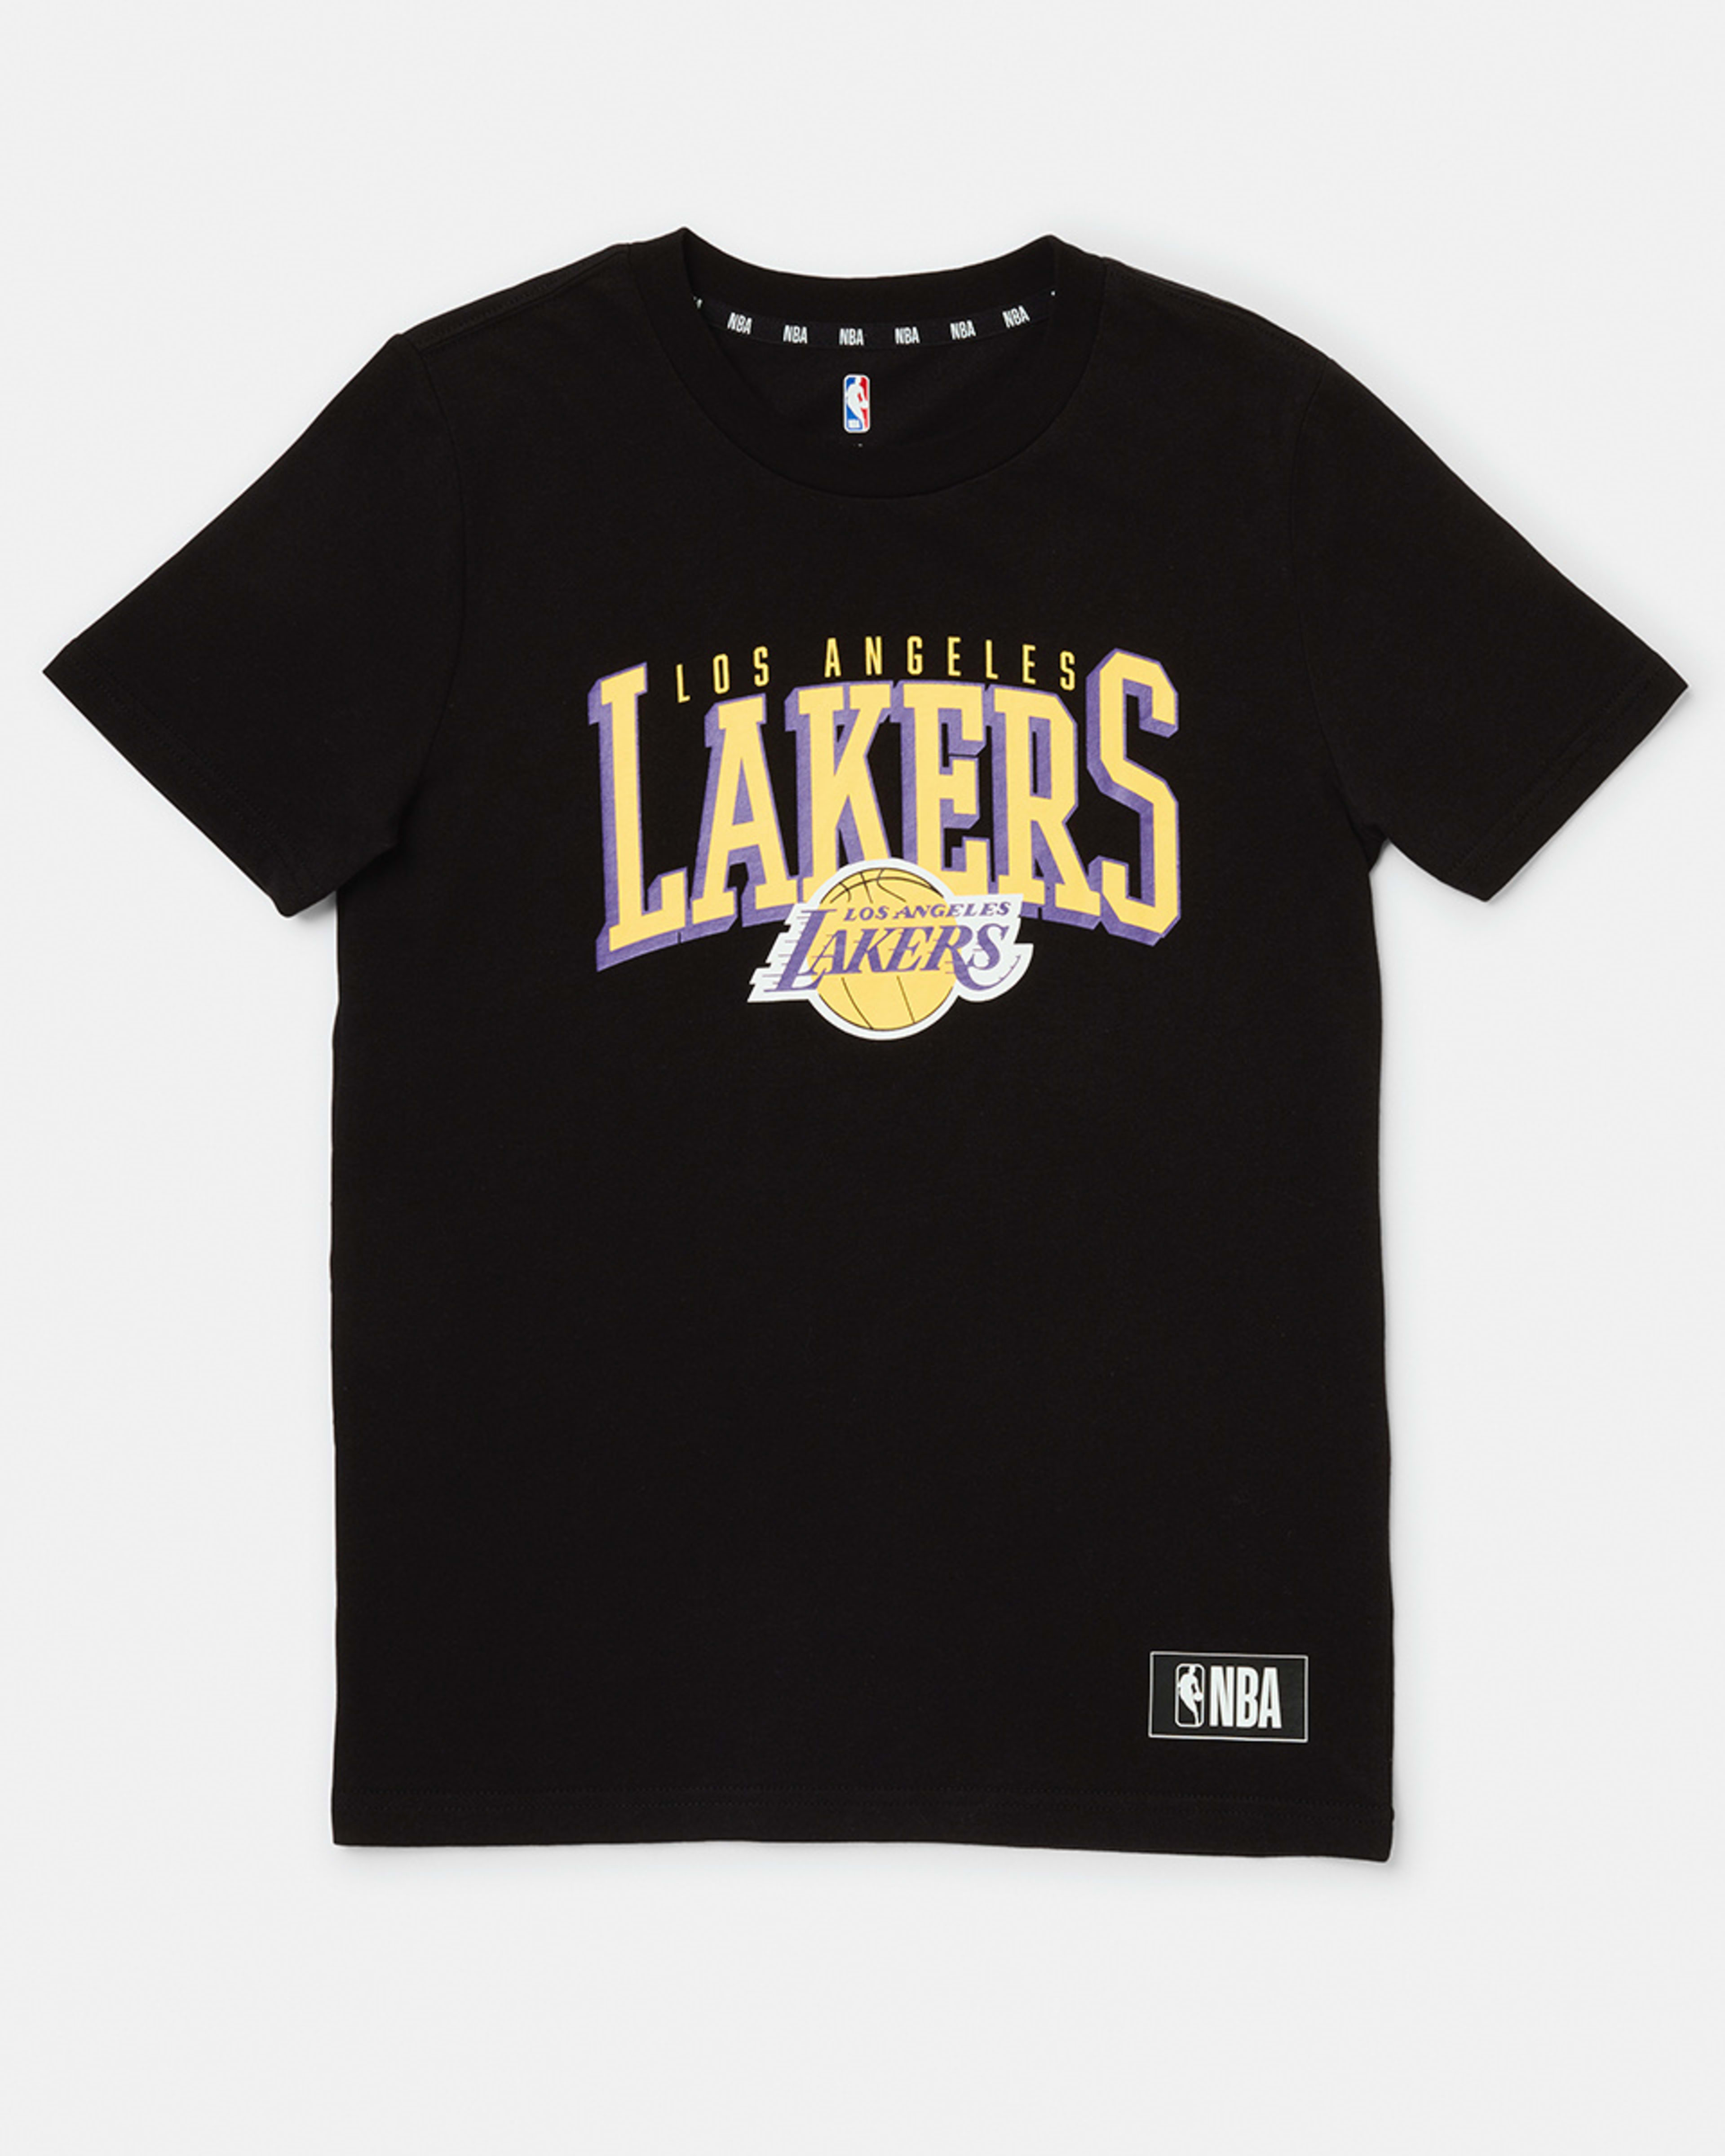 Active Kids NBA Youth Los Angeles Lakers Crew Neck T-shirt - Kmart